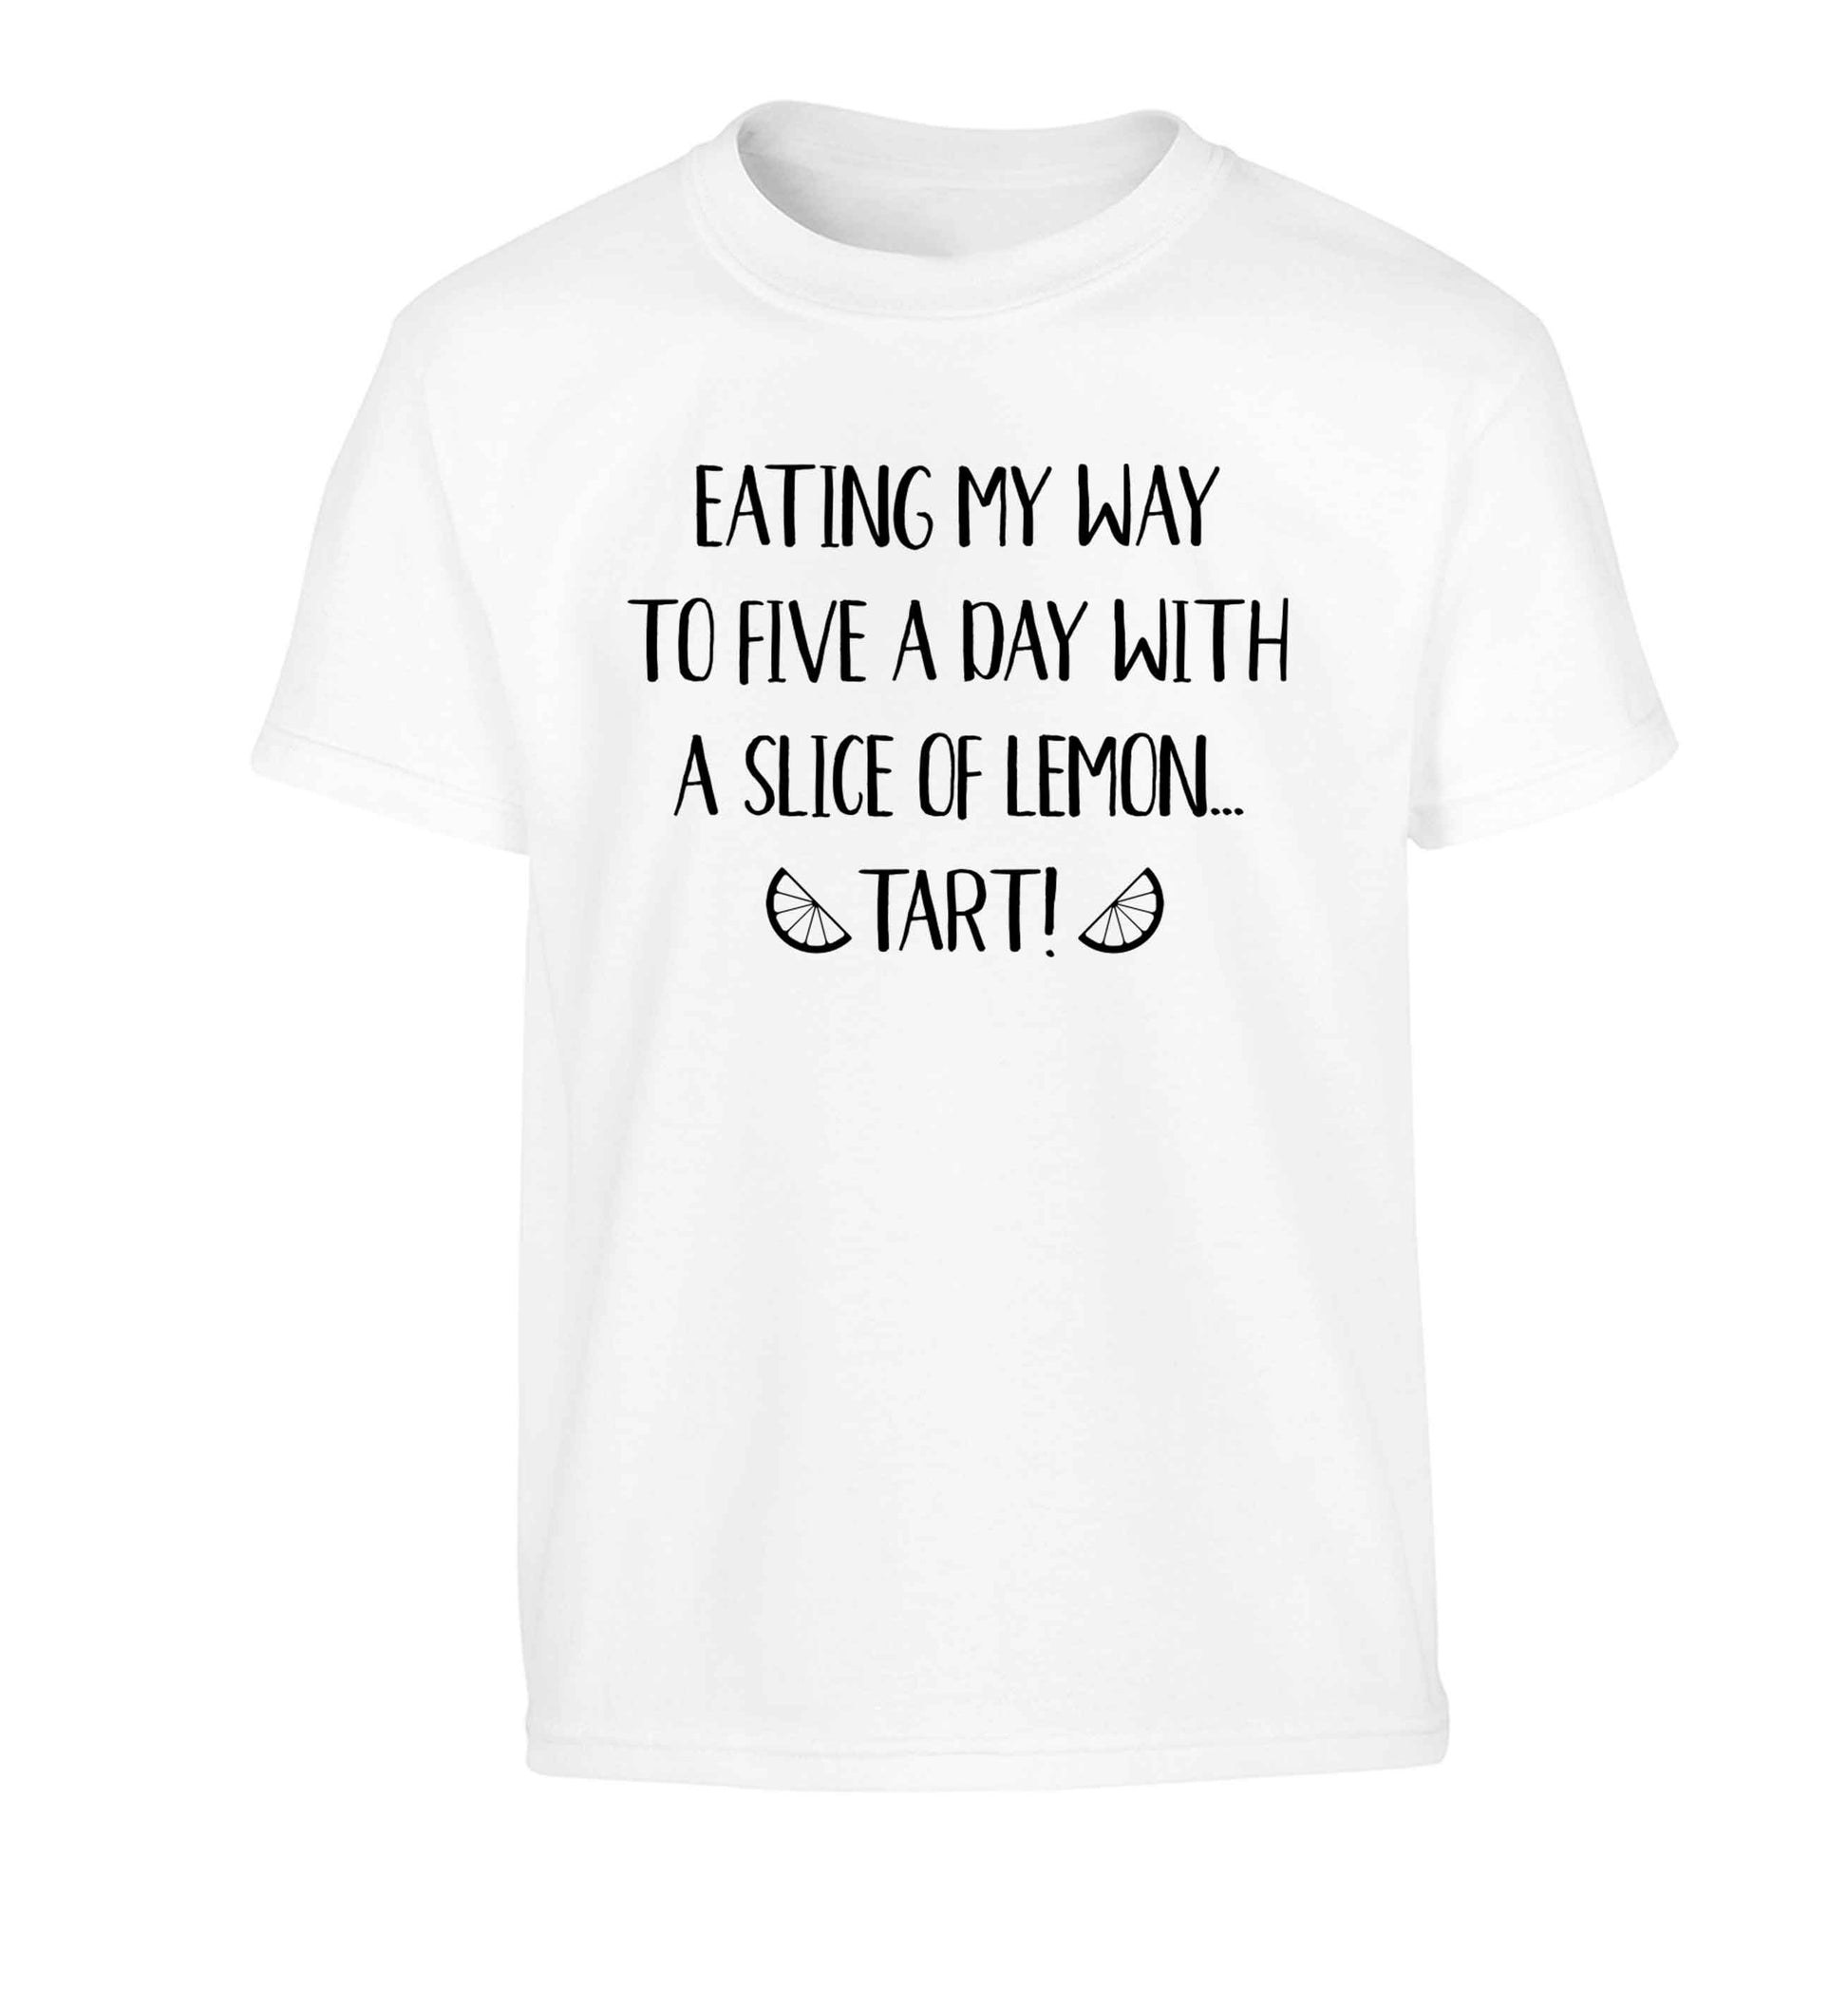 Eating my way to five a day with a slice of lemon tart Children's white Tshirt 12-13 Years